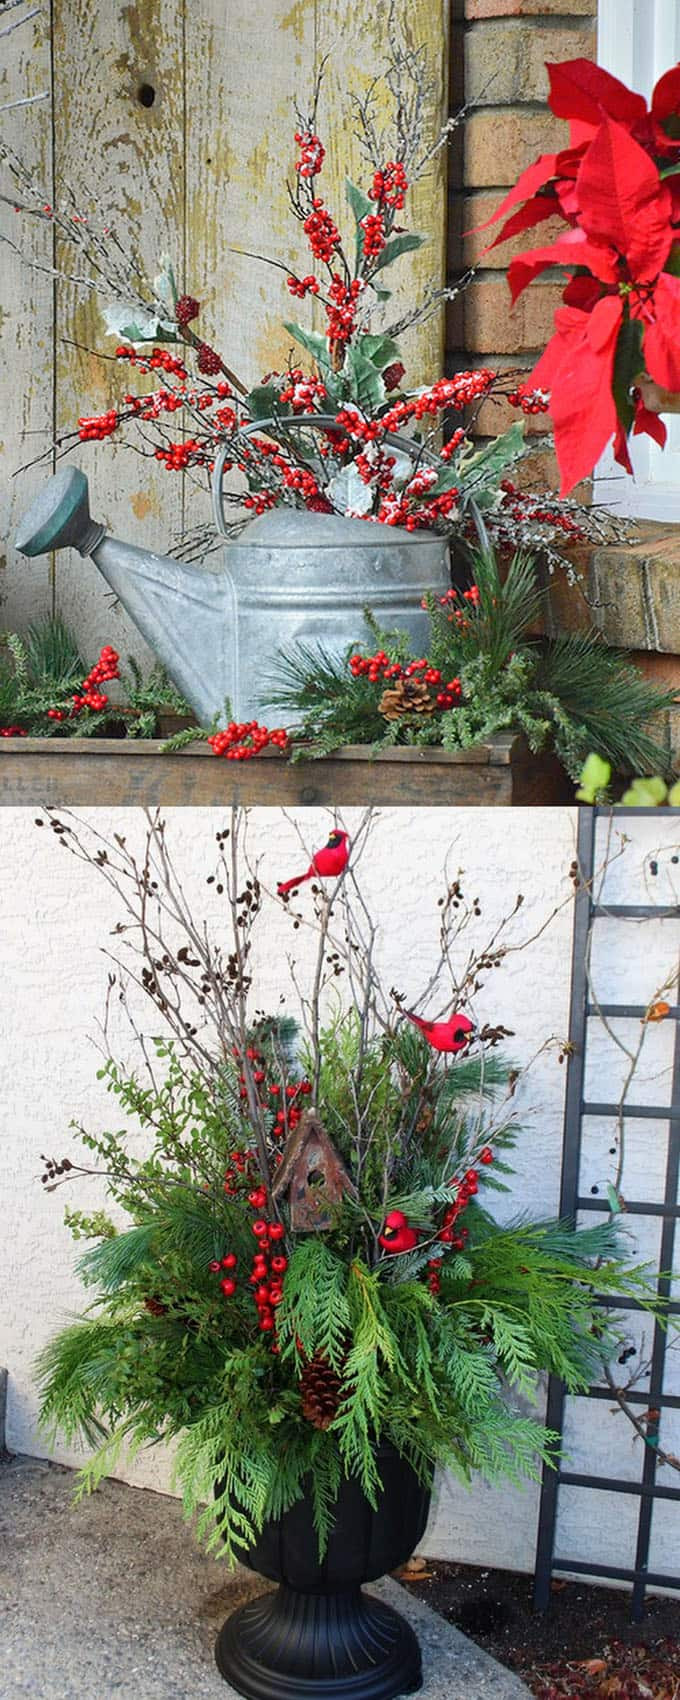 Outdoor Christmas Planters
 24 Colorful Winter Planters & Christmas Outdoor